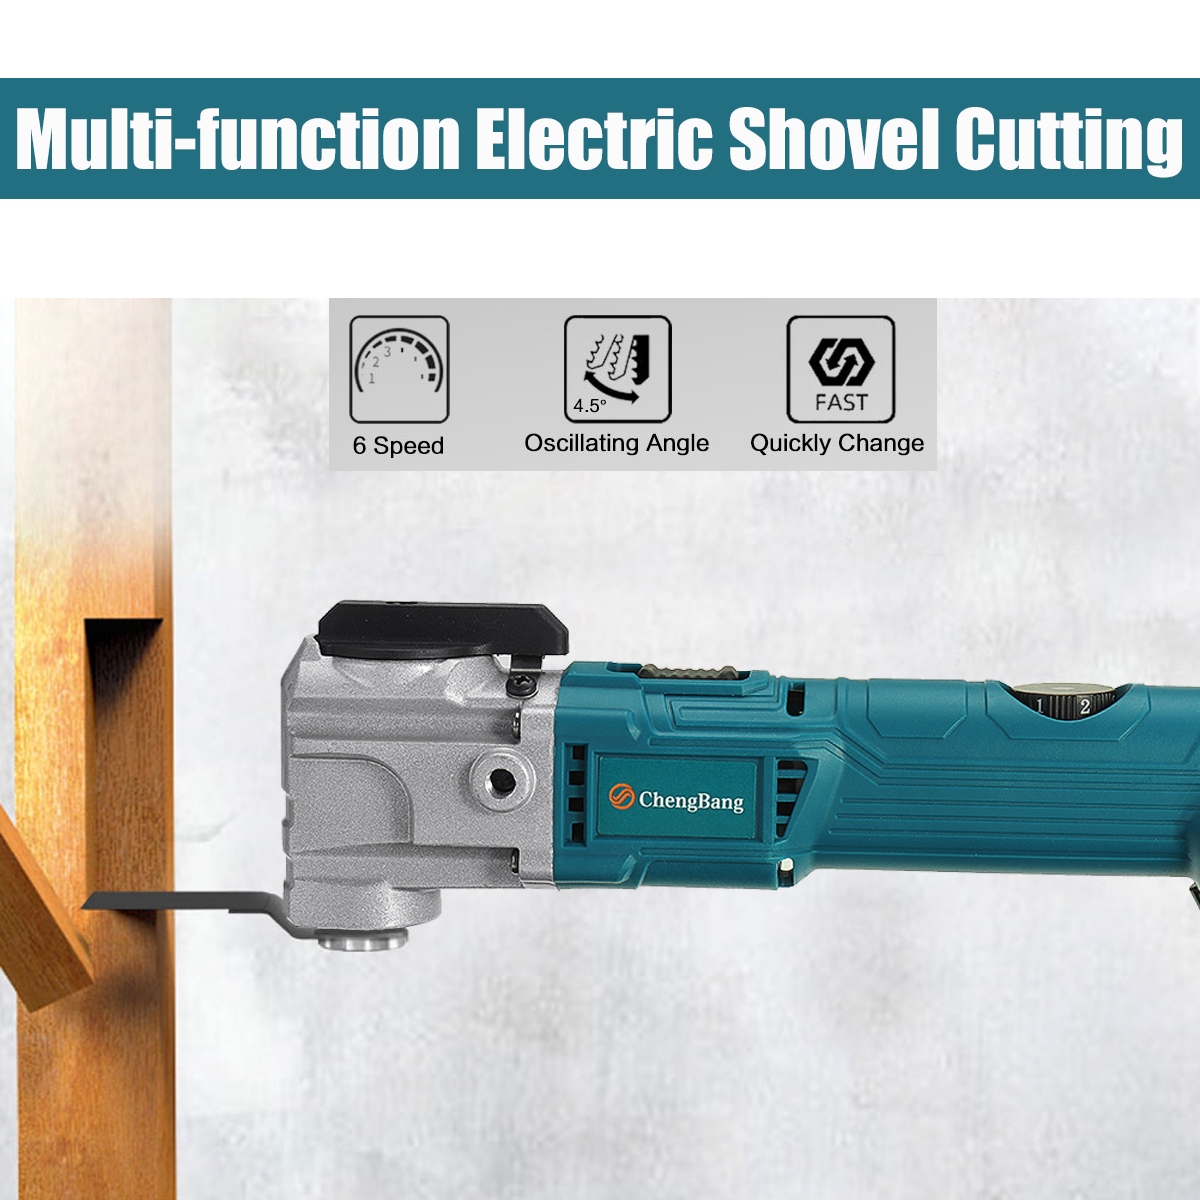 25mm-6-Speed-Brushless-Rechargeable-Angle-Grinder-Cordless-Electric-Grinder-Polishing-Machine-Oscill-1914411-8